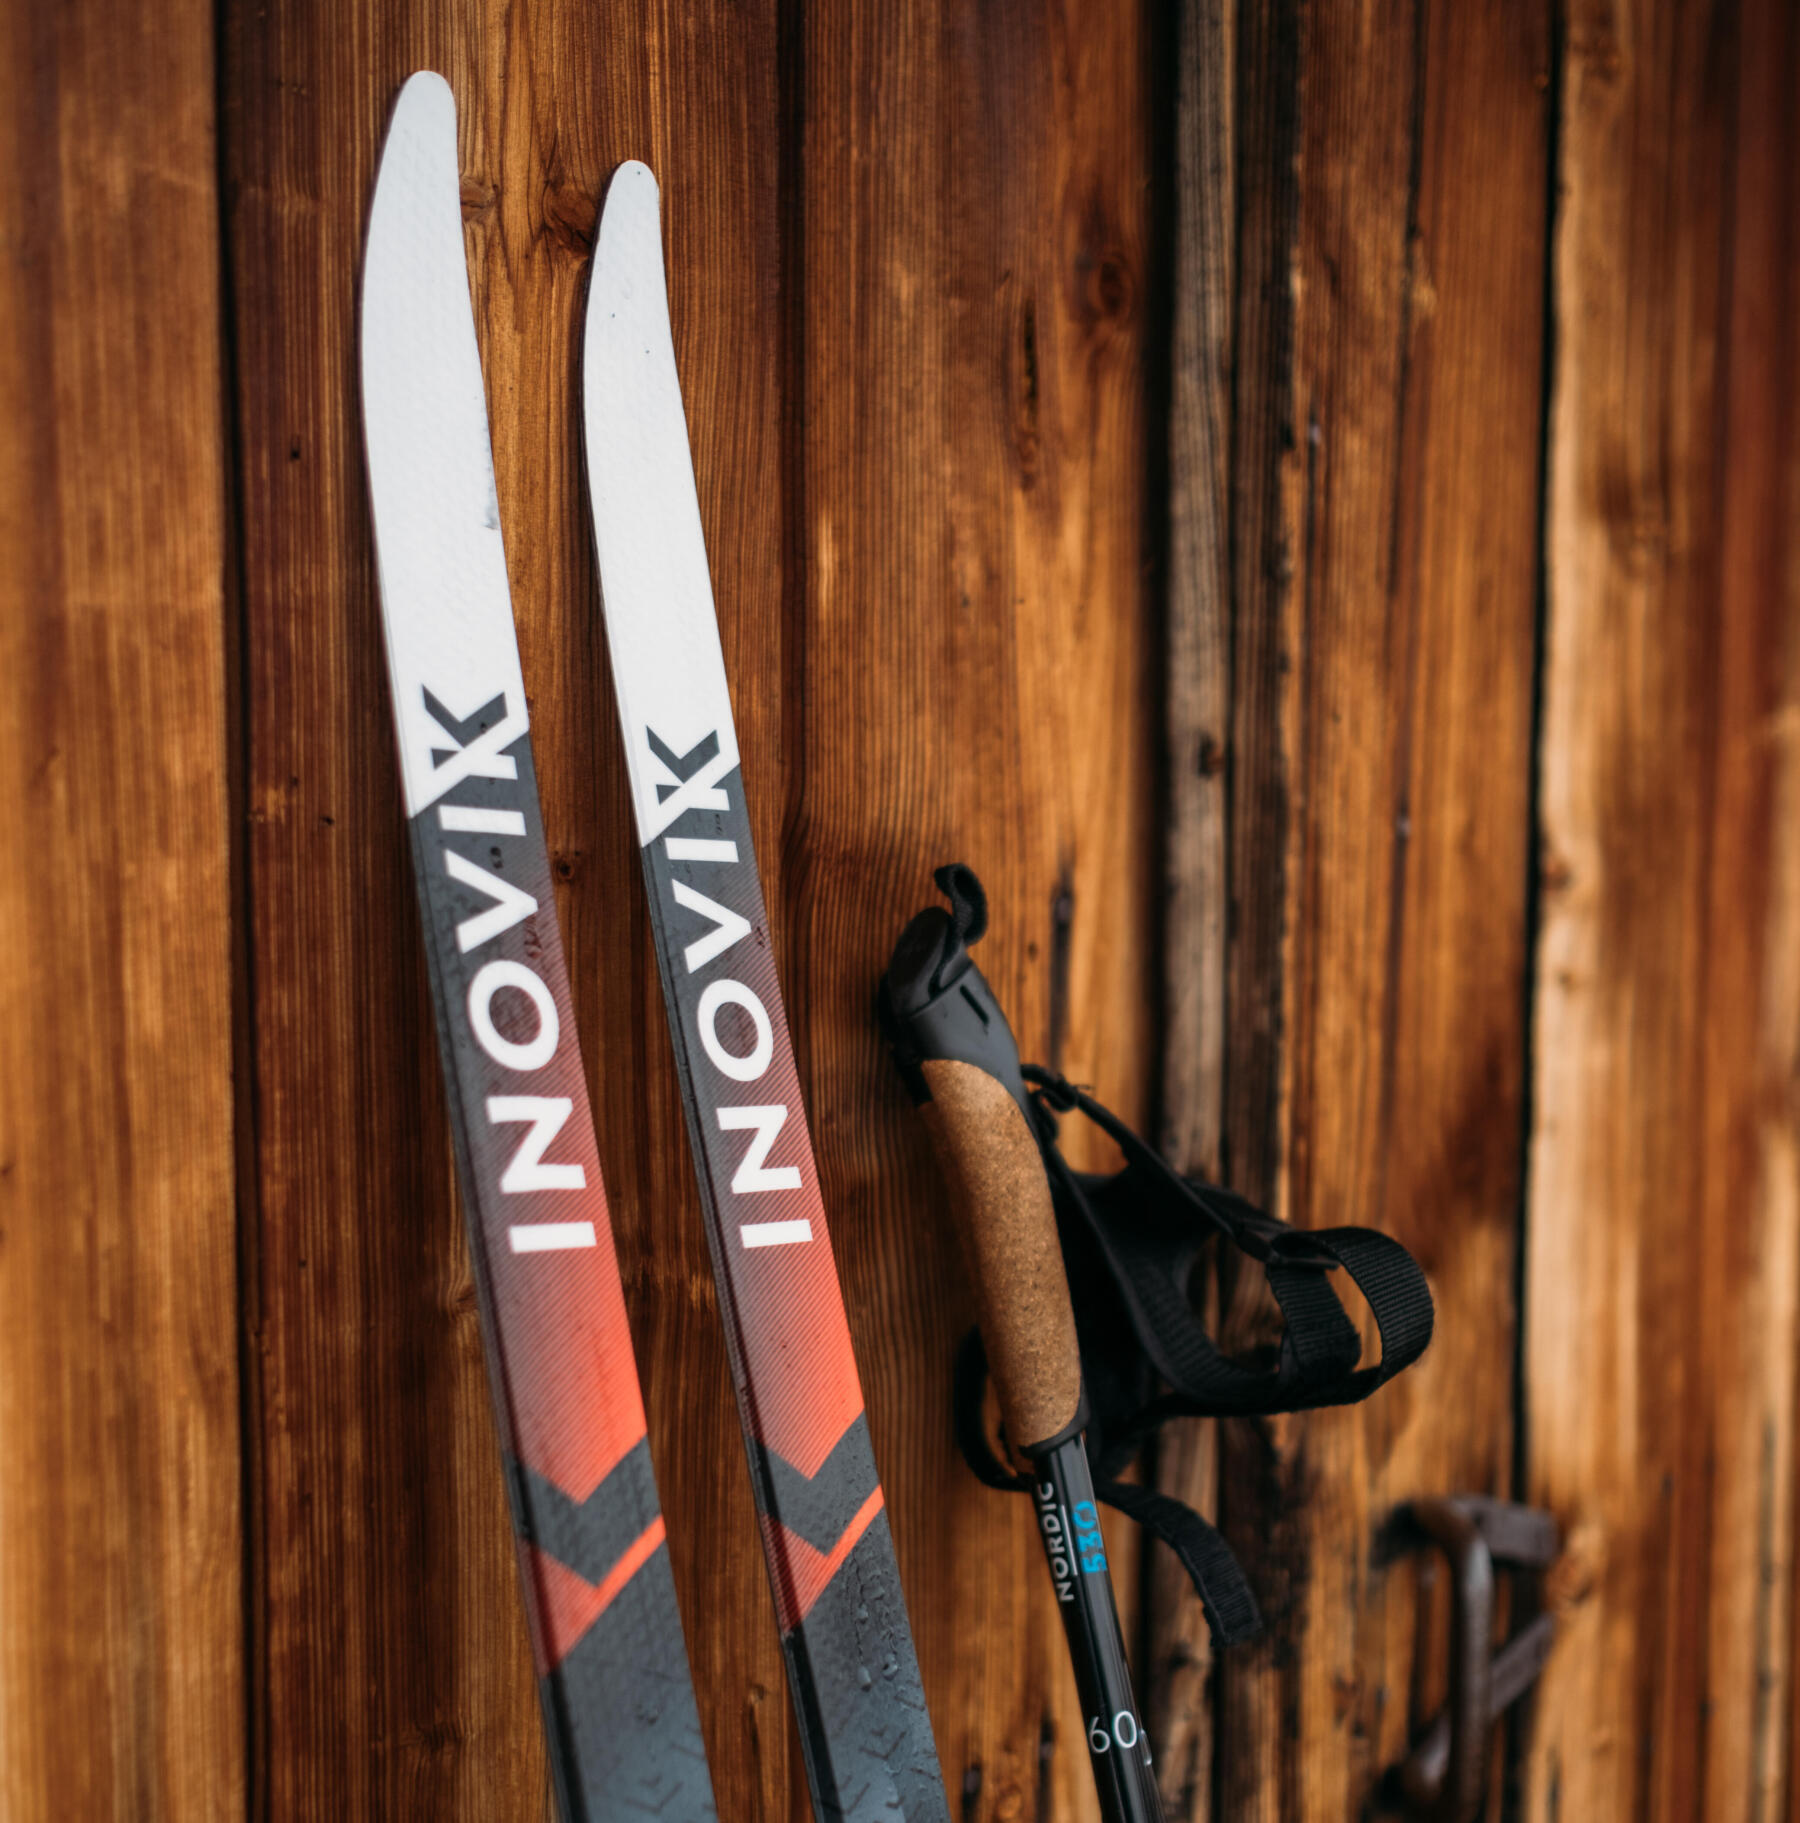 Looking after and repairing your skis